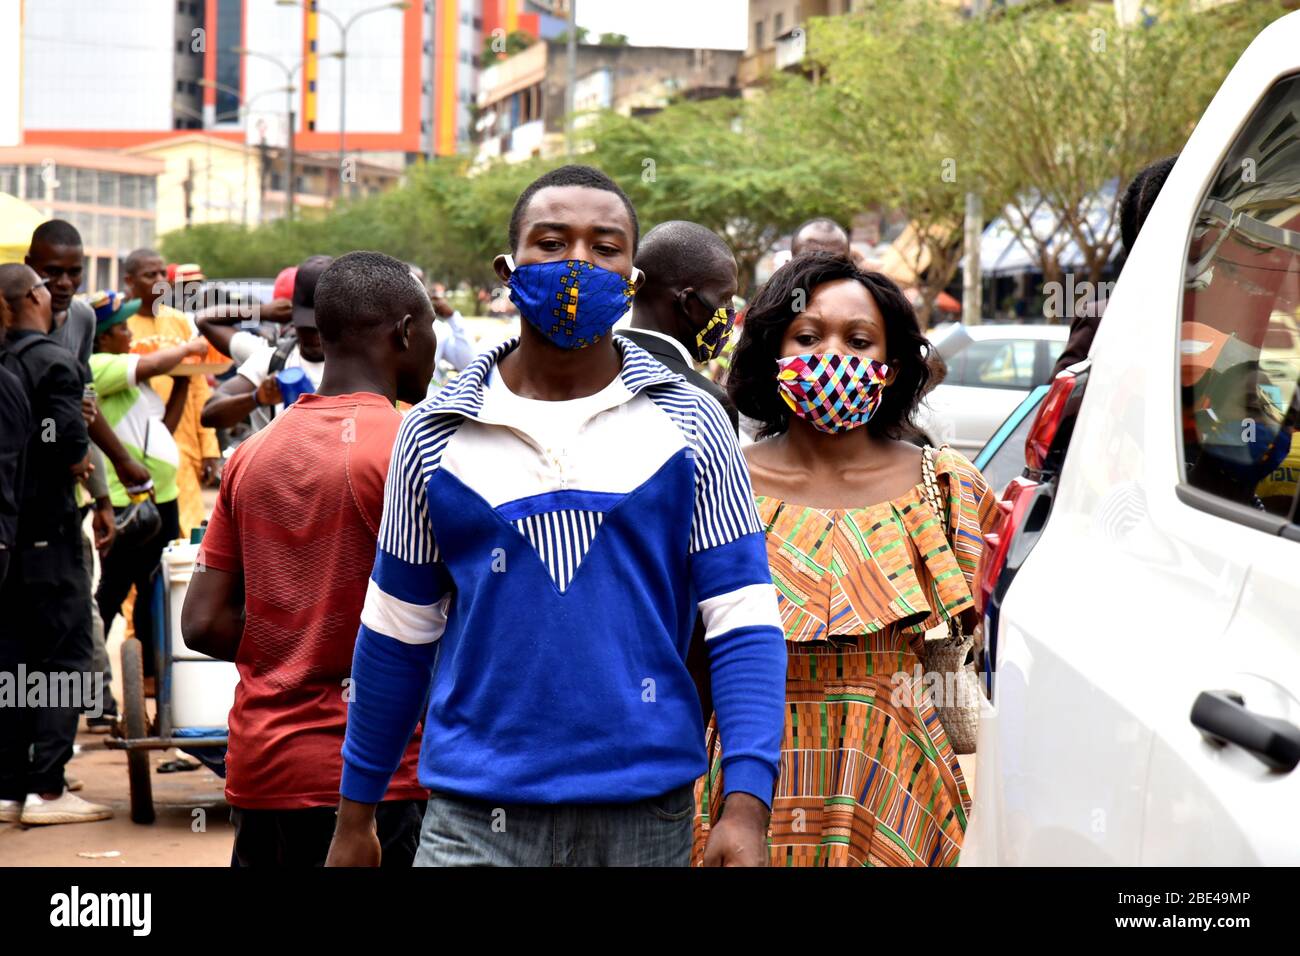 Yaounde. 9th Apr, 2020. People wear cloth face masks to protect themselves against the COVID-19 in Yaounde, Cameroon on April 9, 2020. Recently, the wearing of a protective mask has become mandatory for all Cameroonians wishing to approach certain hospitals and public services, like the General Hospital of Yaounde, and government bodies in the country's southwest region. Credit: Jean Pierre Kepseu/Xinhua/Alamy Live News Stock Photo